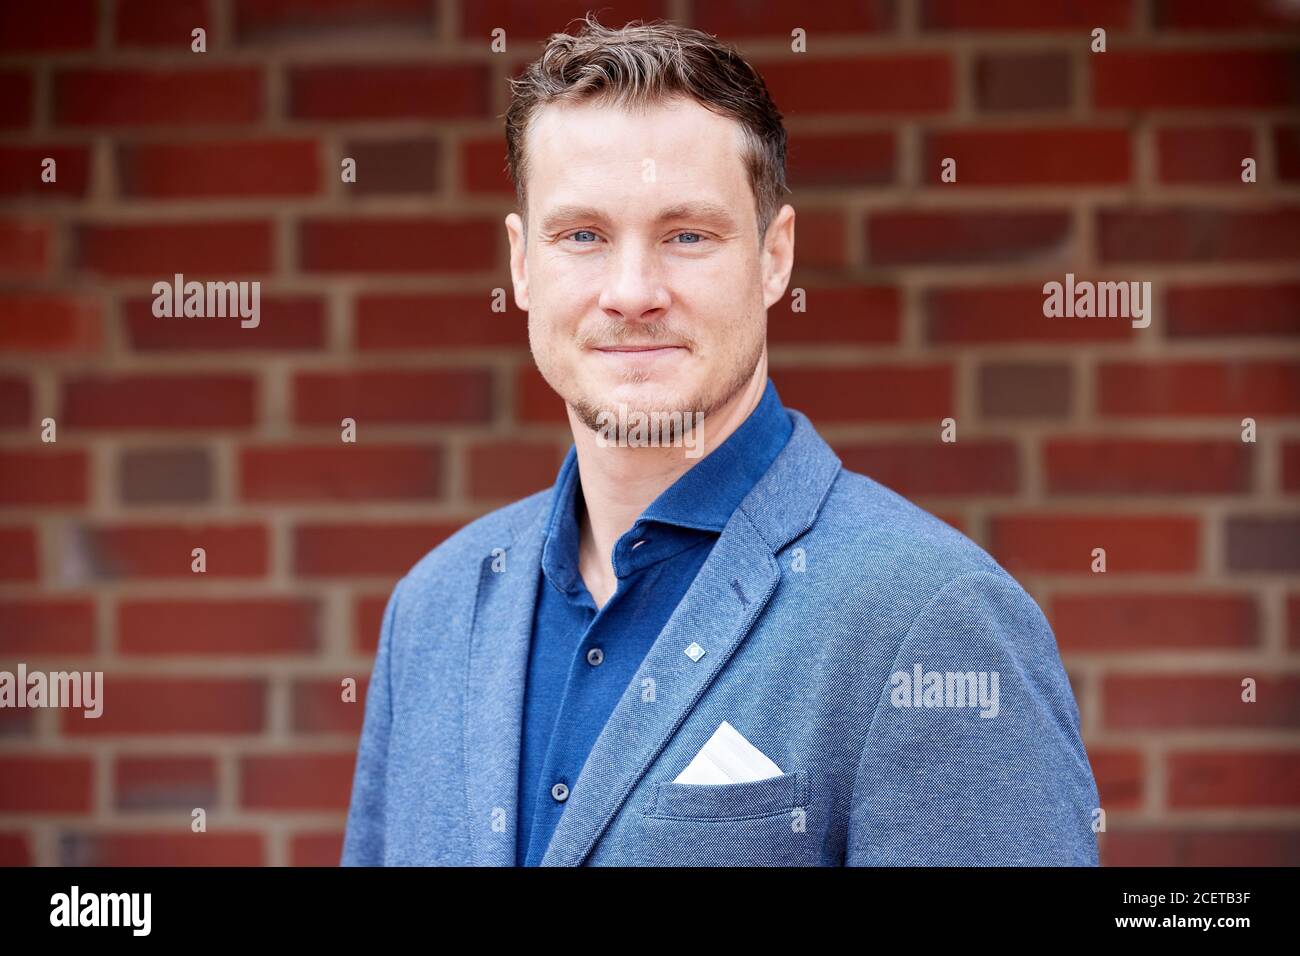 Rellingen, Germany. 02nd Sep, 2020. HSV President Marcell Jansen stands in front of a brick wall at the Statics medical supply store. Credit: Georg Wendt/dpa/Alamy Live News Stock Photo